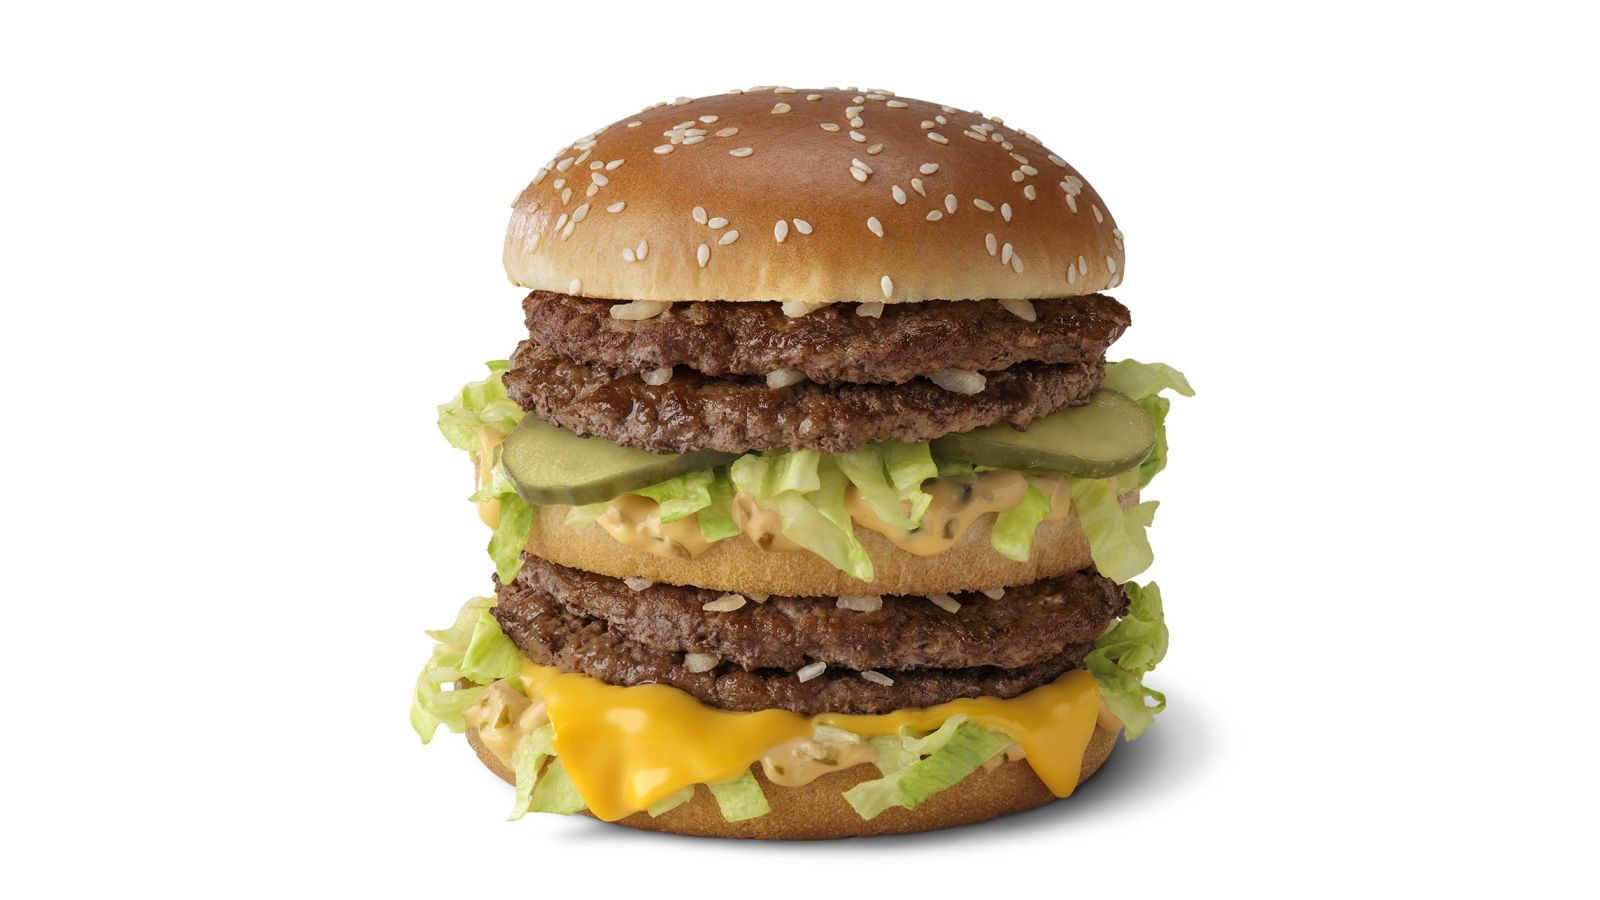 McDonald's is bringing back the popular Double Big Mac meal after four years